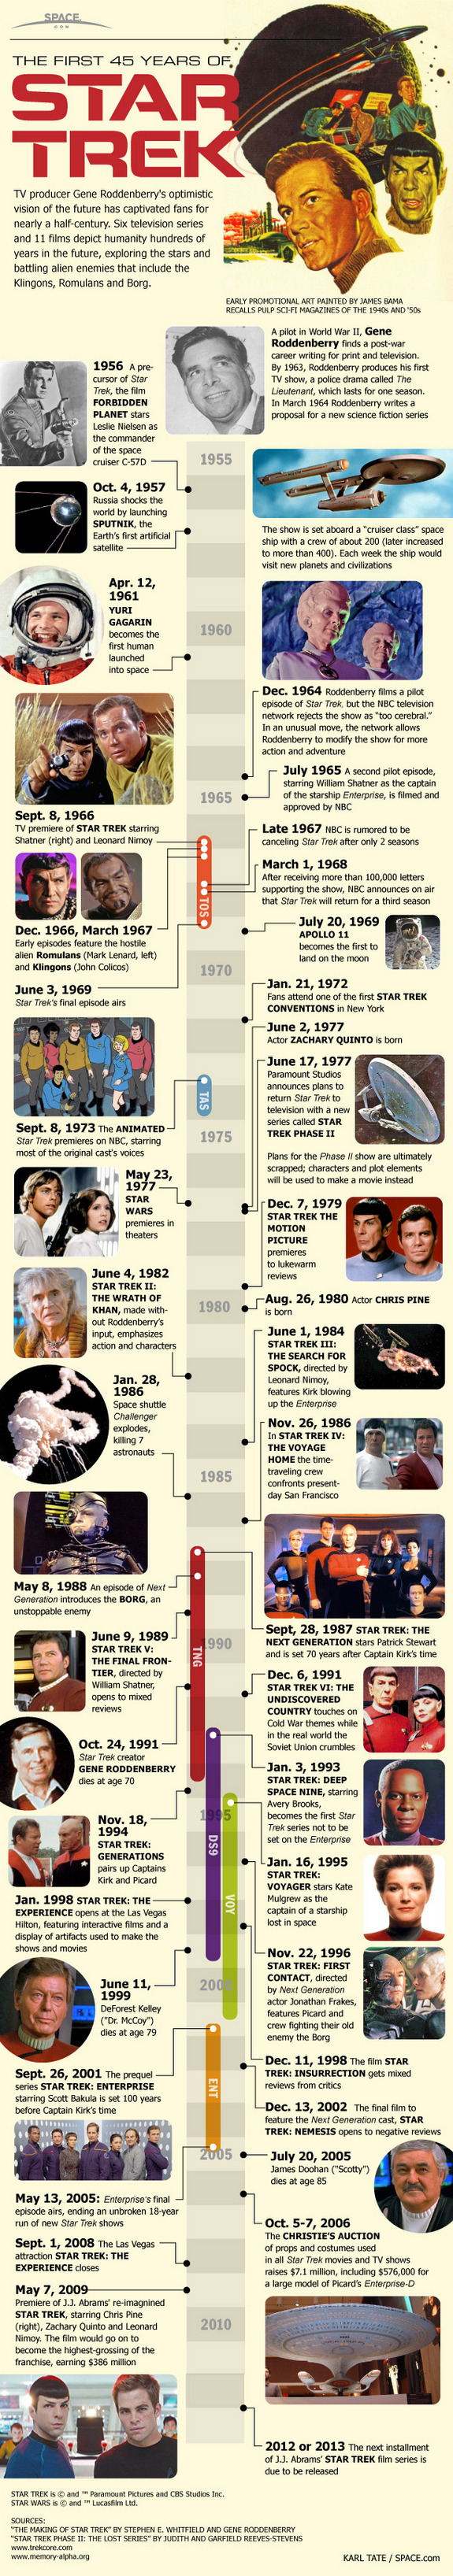 The entire history of Star Trek is in this SPACE.com timeline infographic.